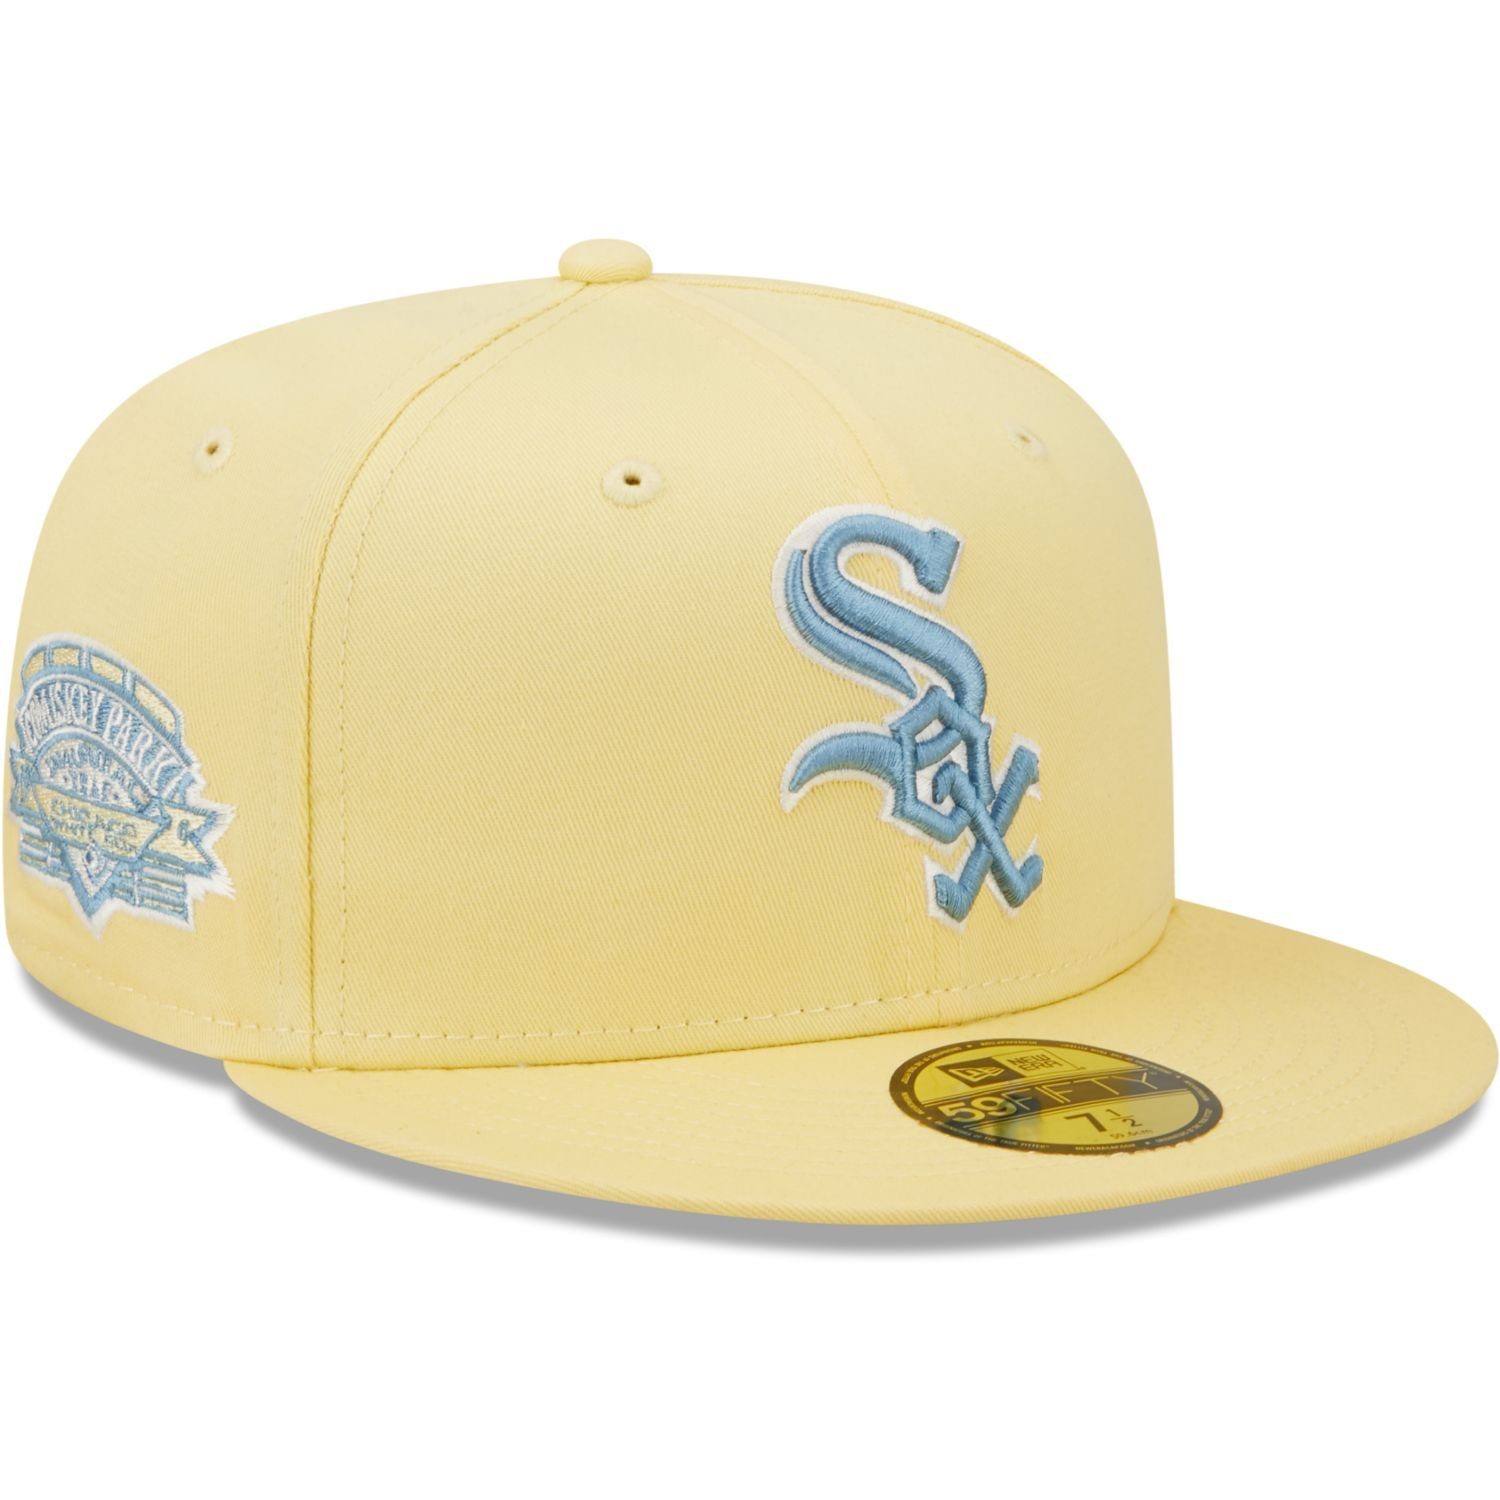 New Era Fitted Cap 59Fifty COOPERSTOWN Chicago White Sox